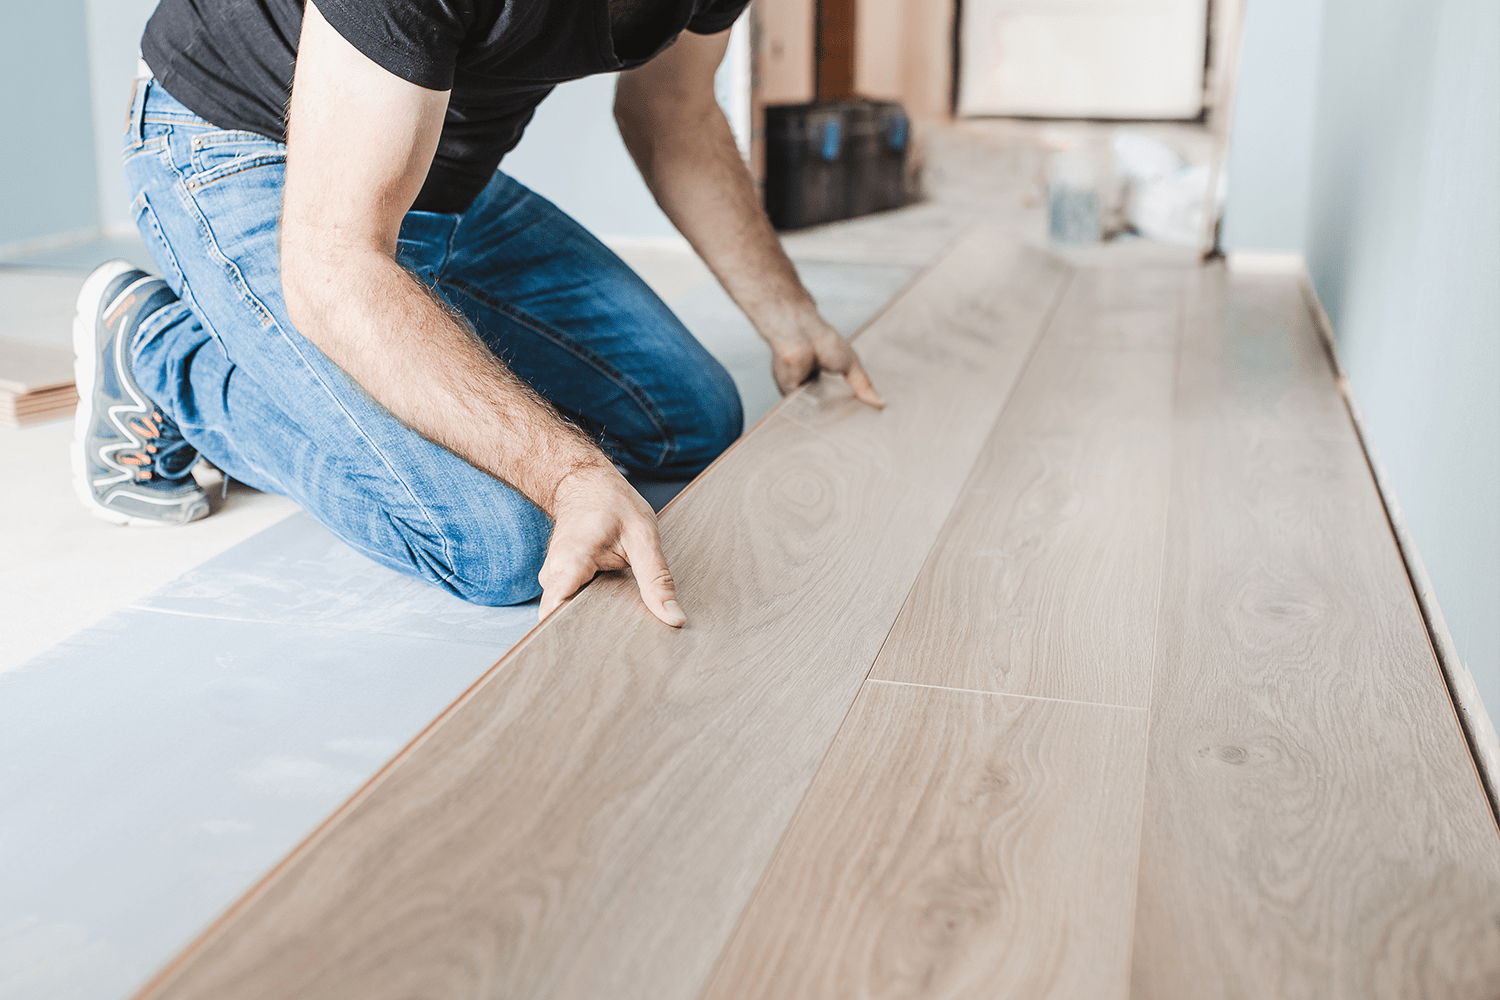 5 Things to Know Before Buying Vinyl Sheet Flooring